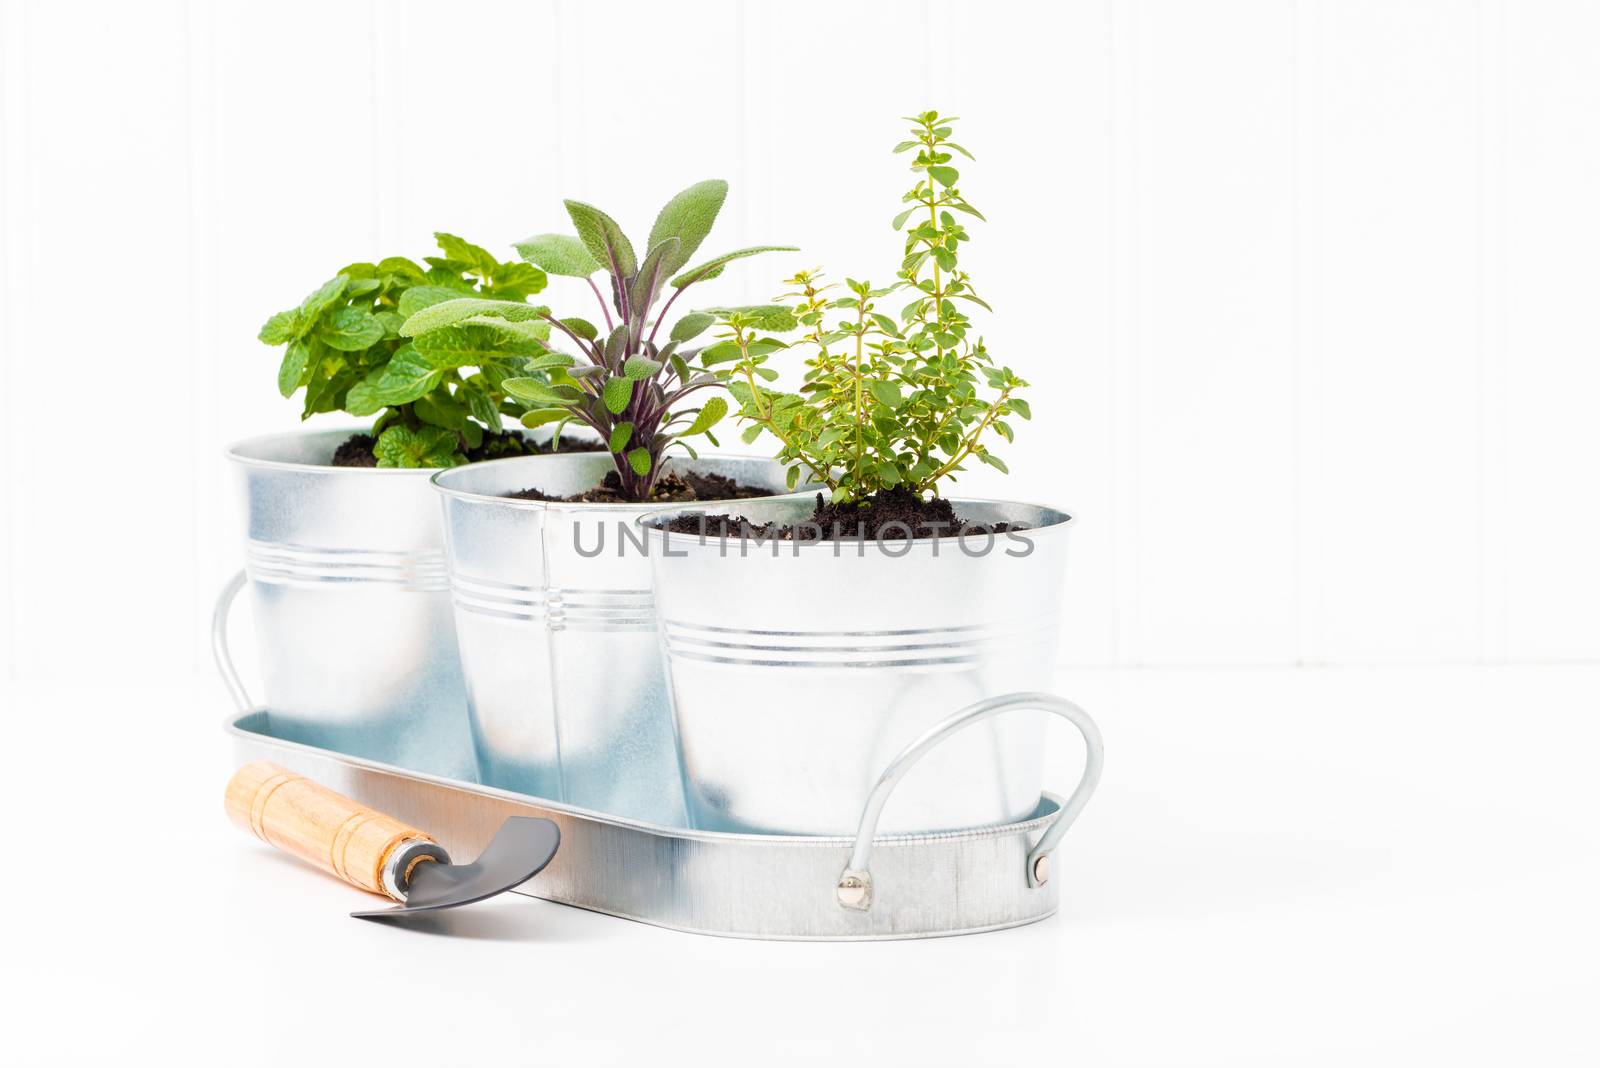 Small herbs in a metal container to create a small indoor herb garden.